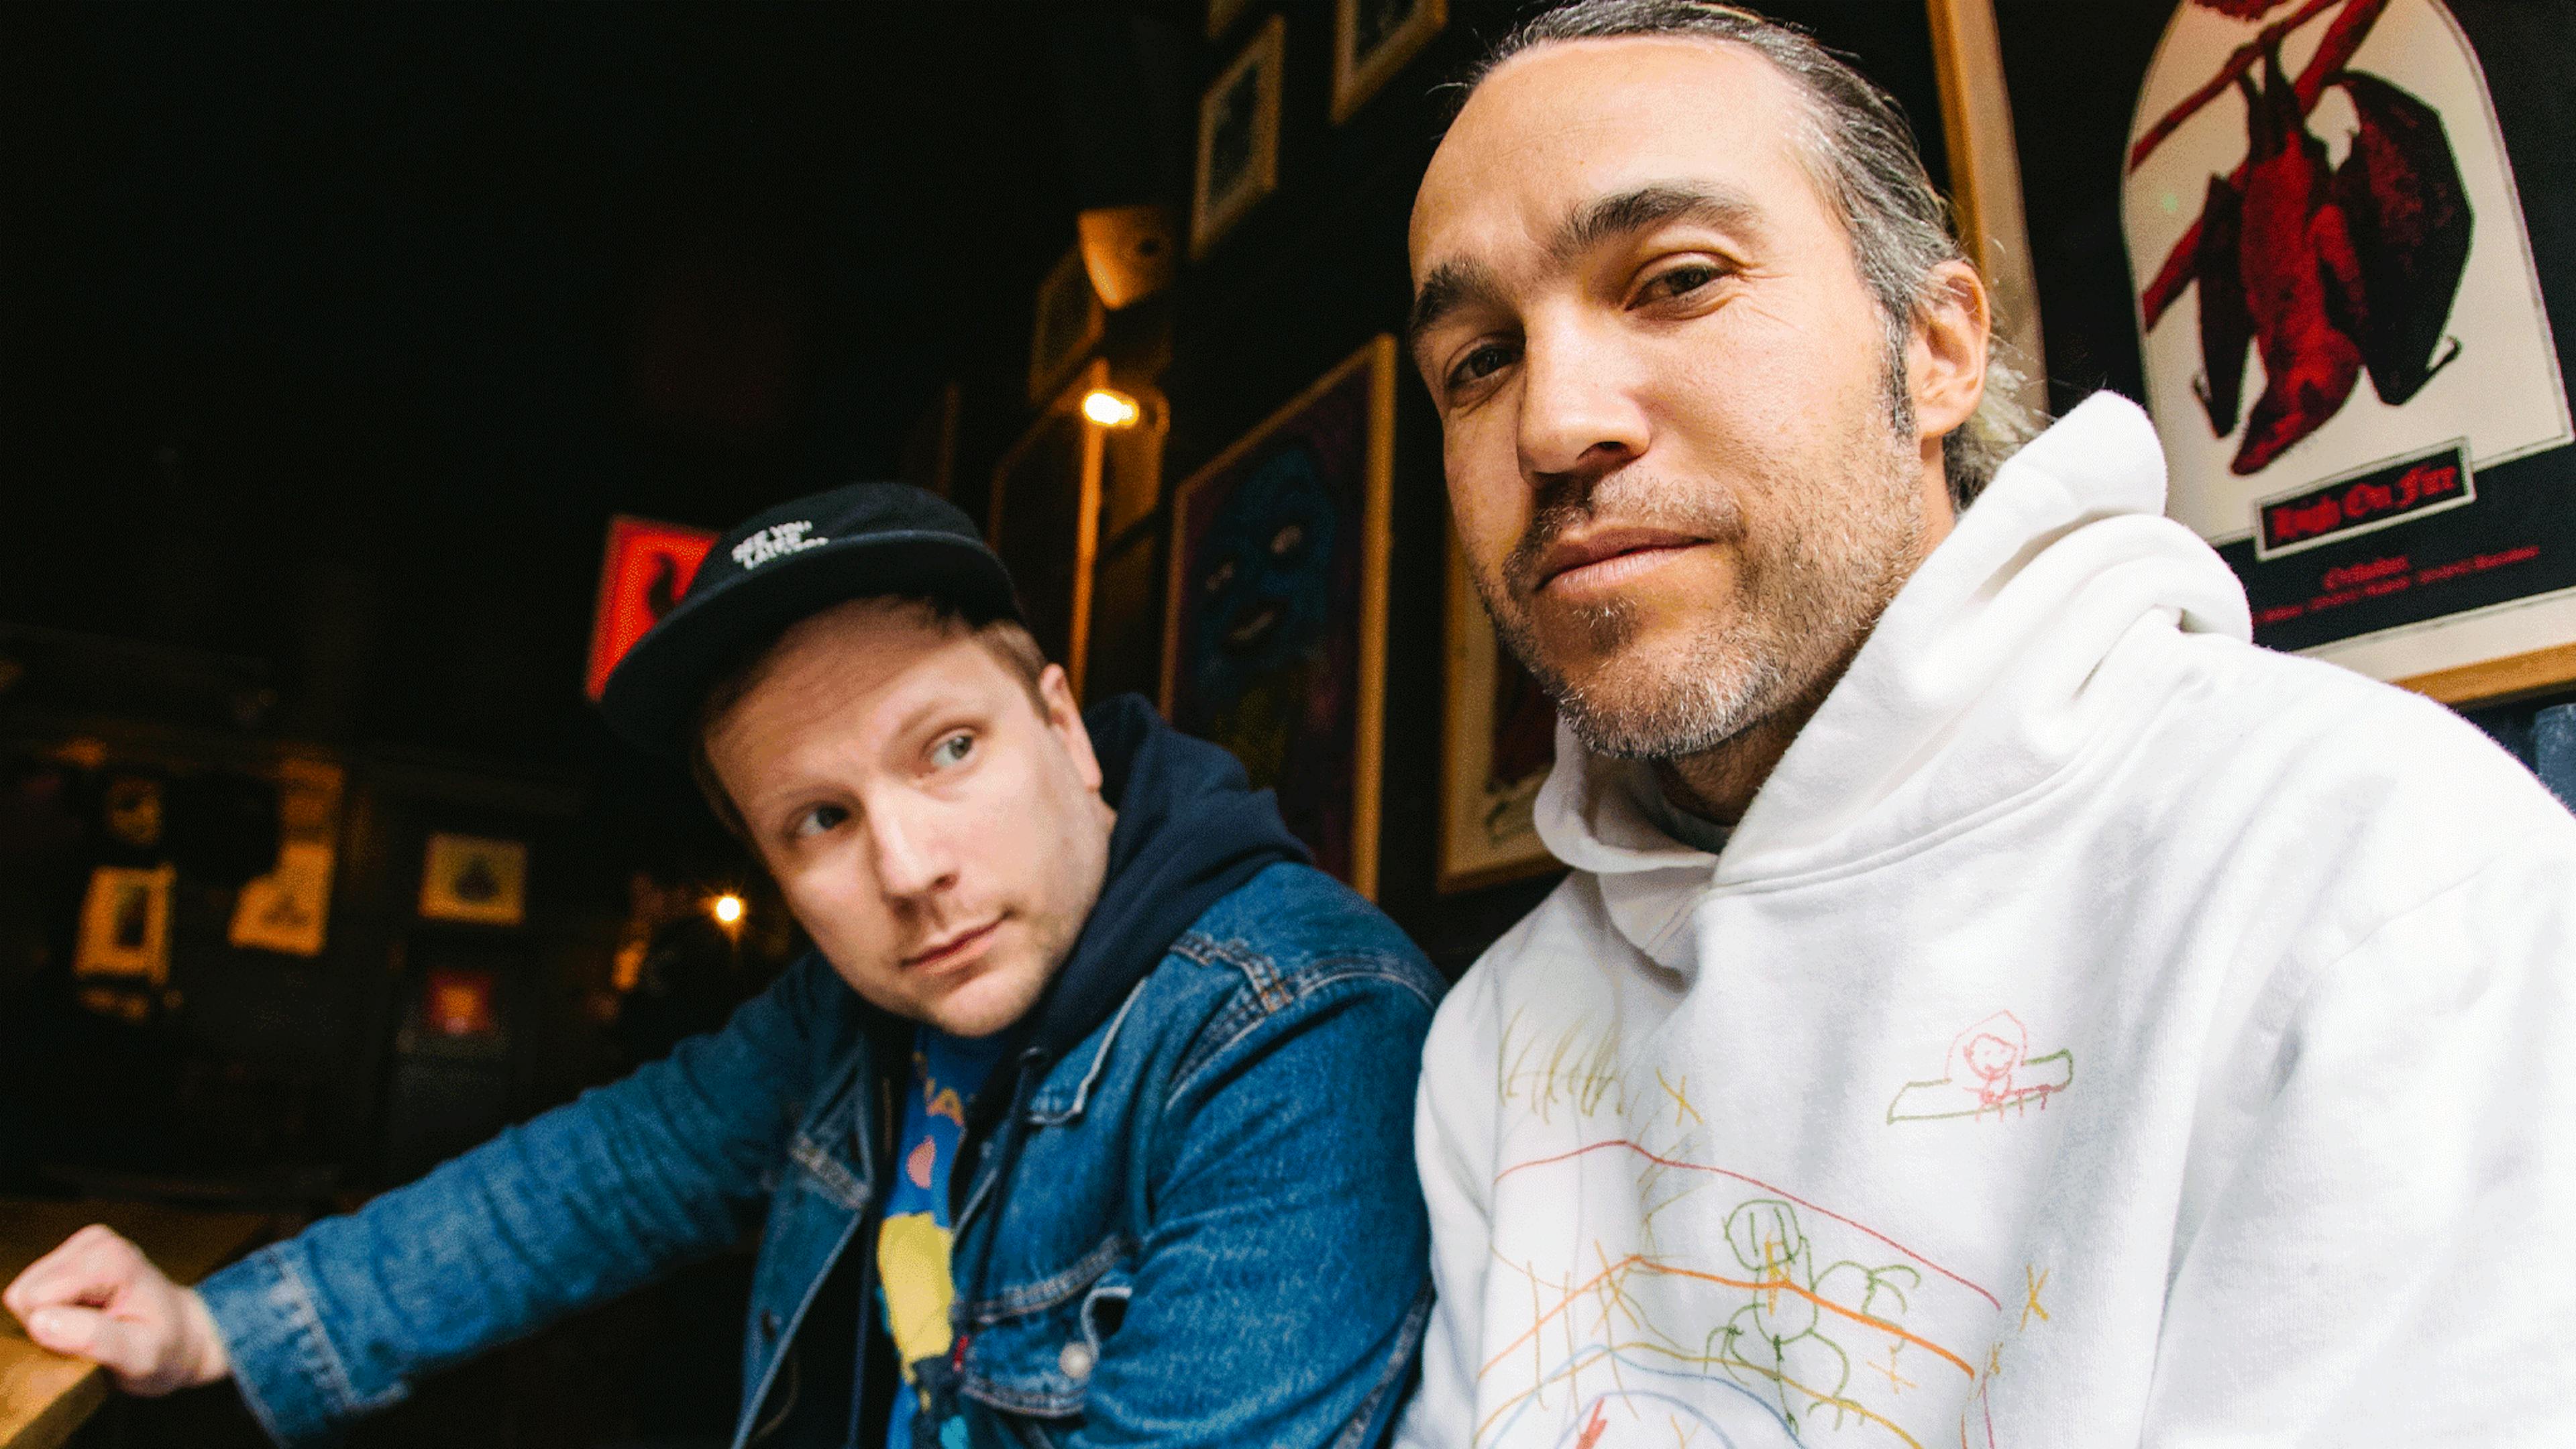 Fall Out Boy: “So often people are comparing eras, but this is the start of a new thing”